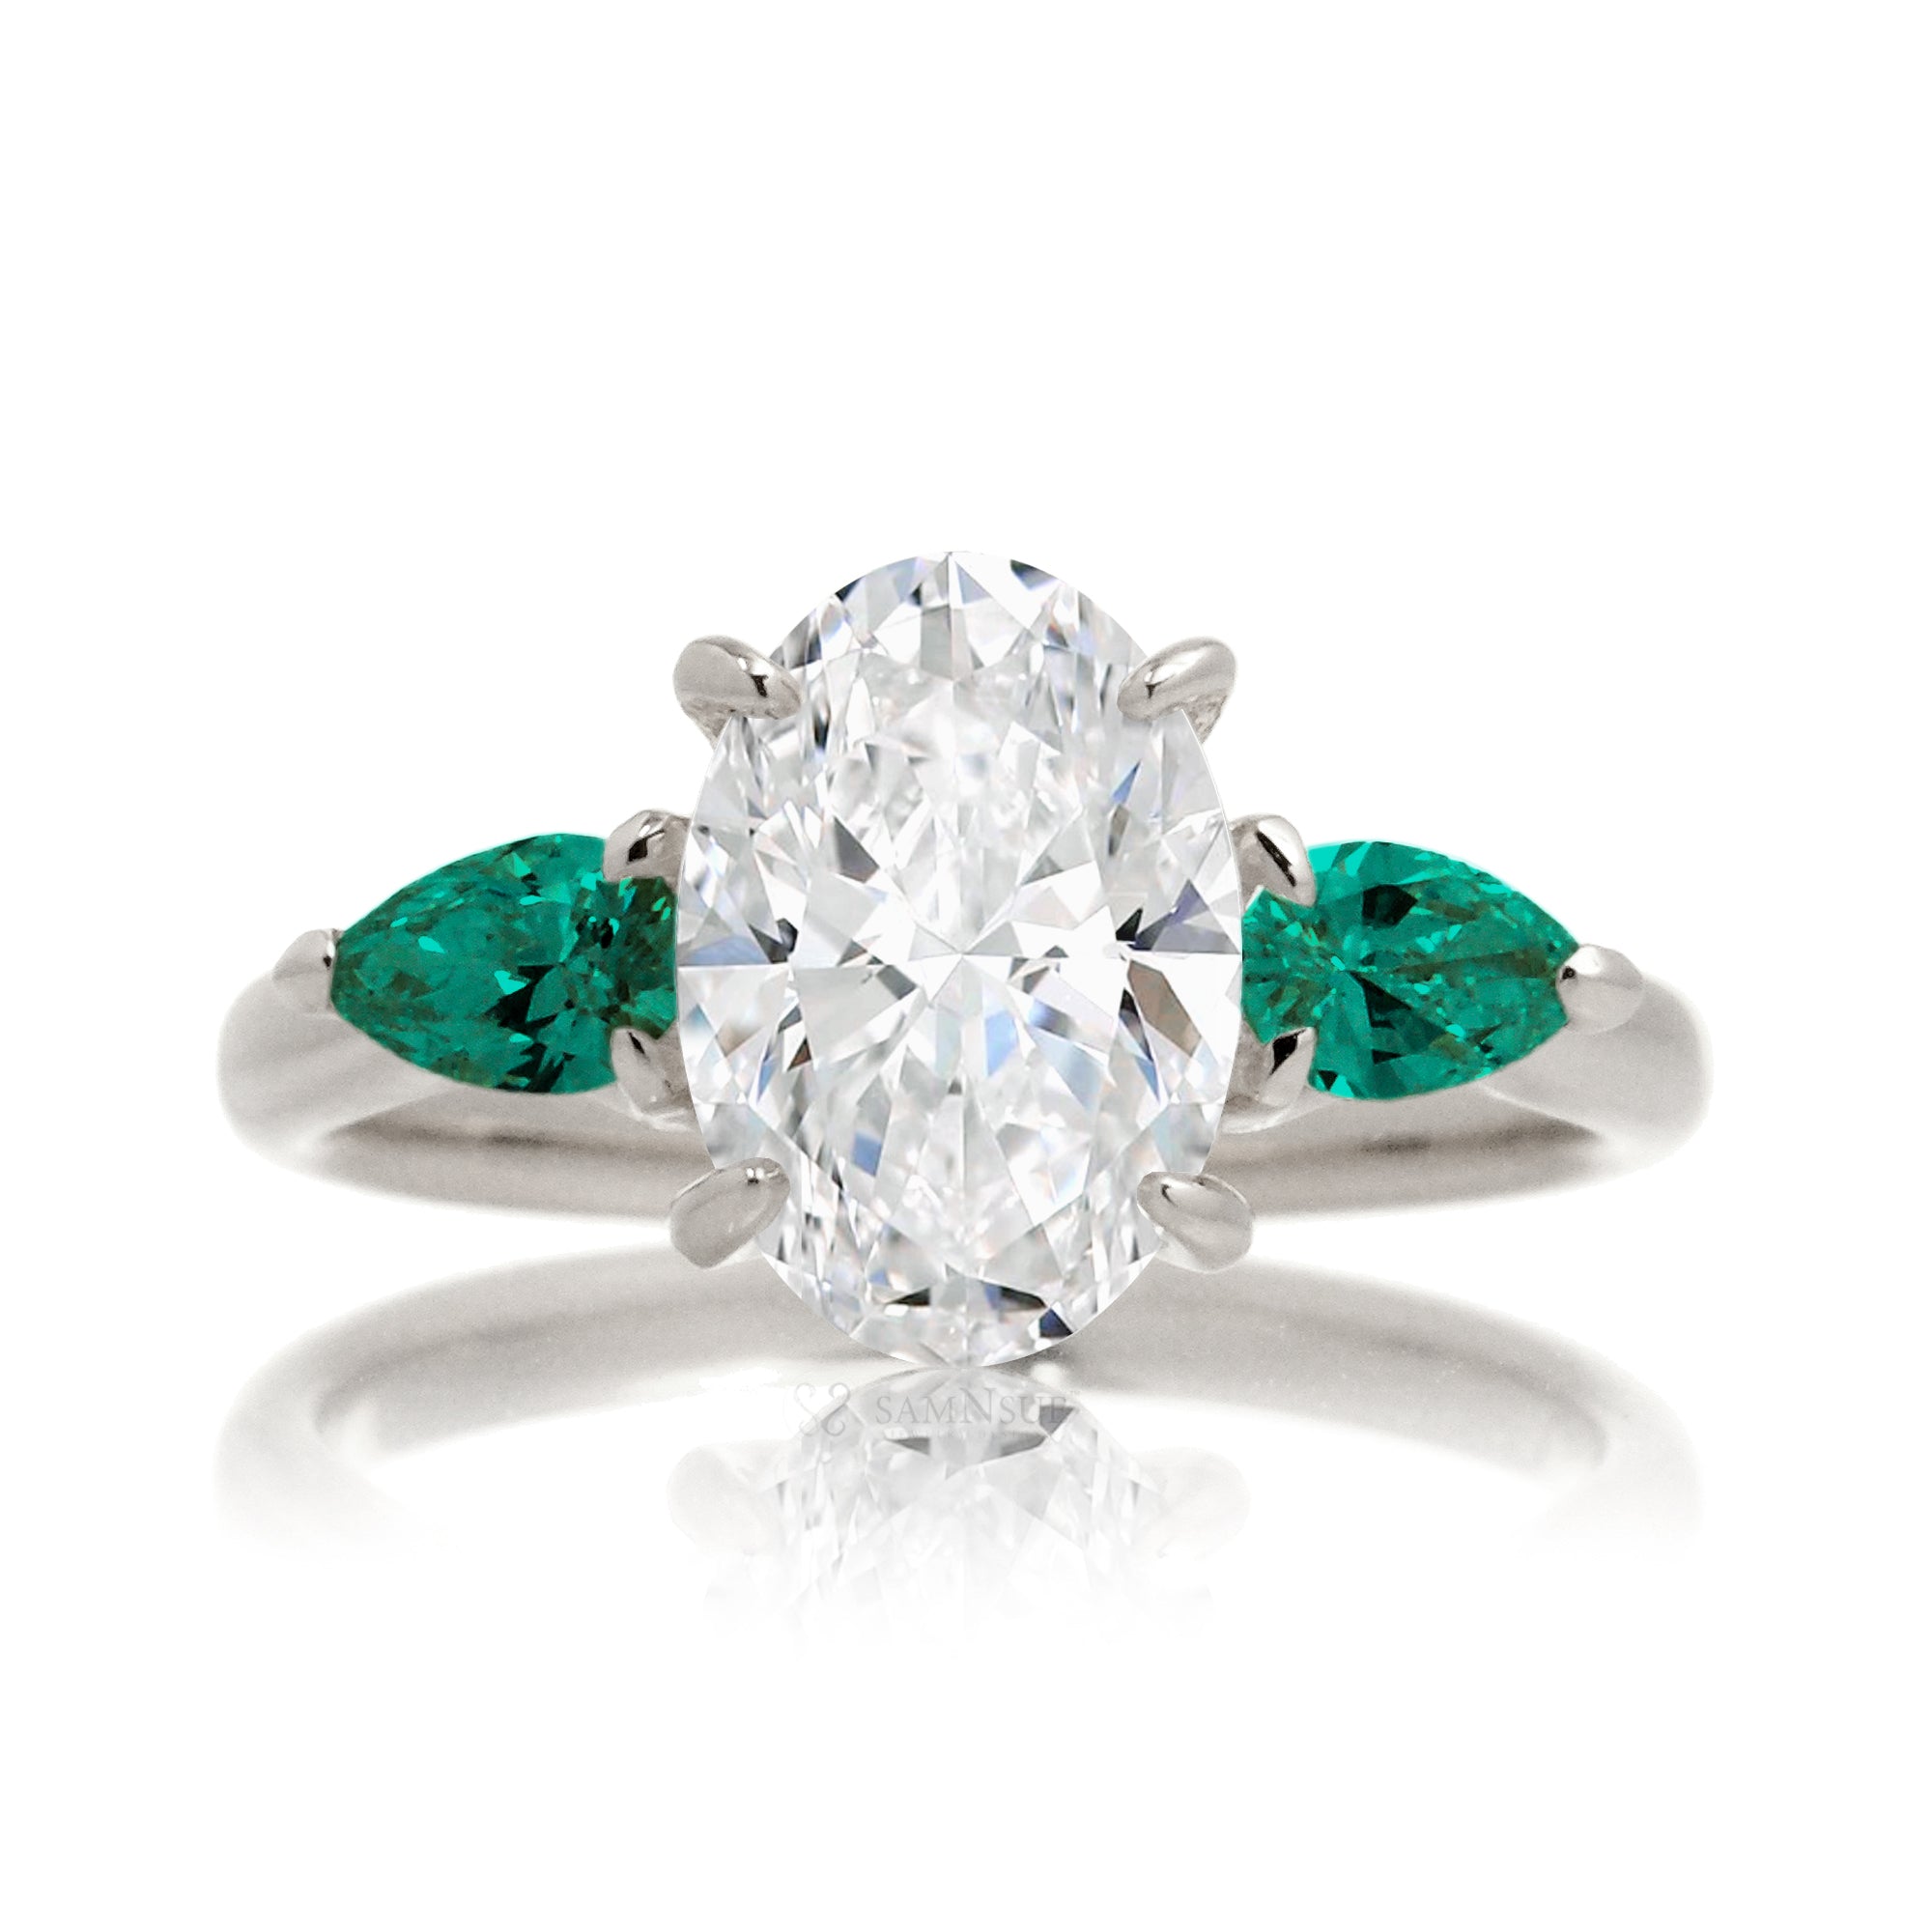 Three-stone pear emerald and oval cut diamond engagement ring white gold